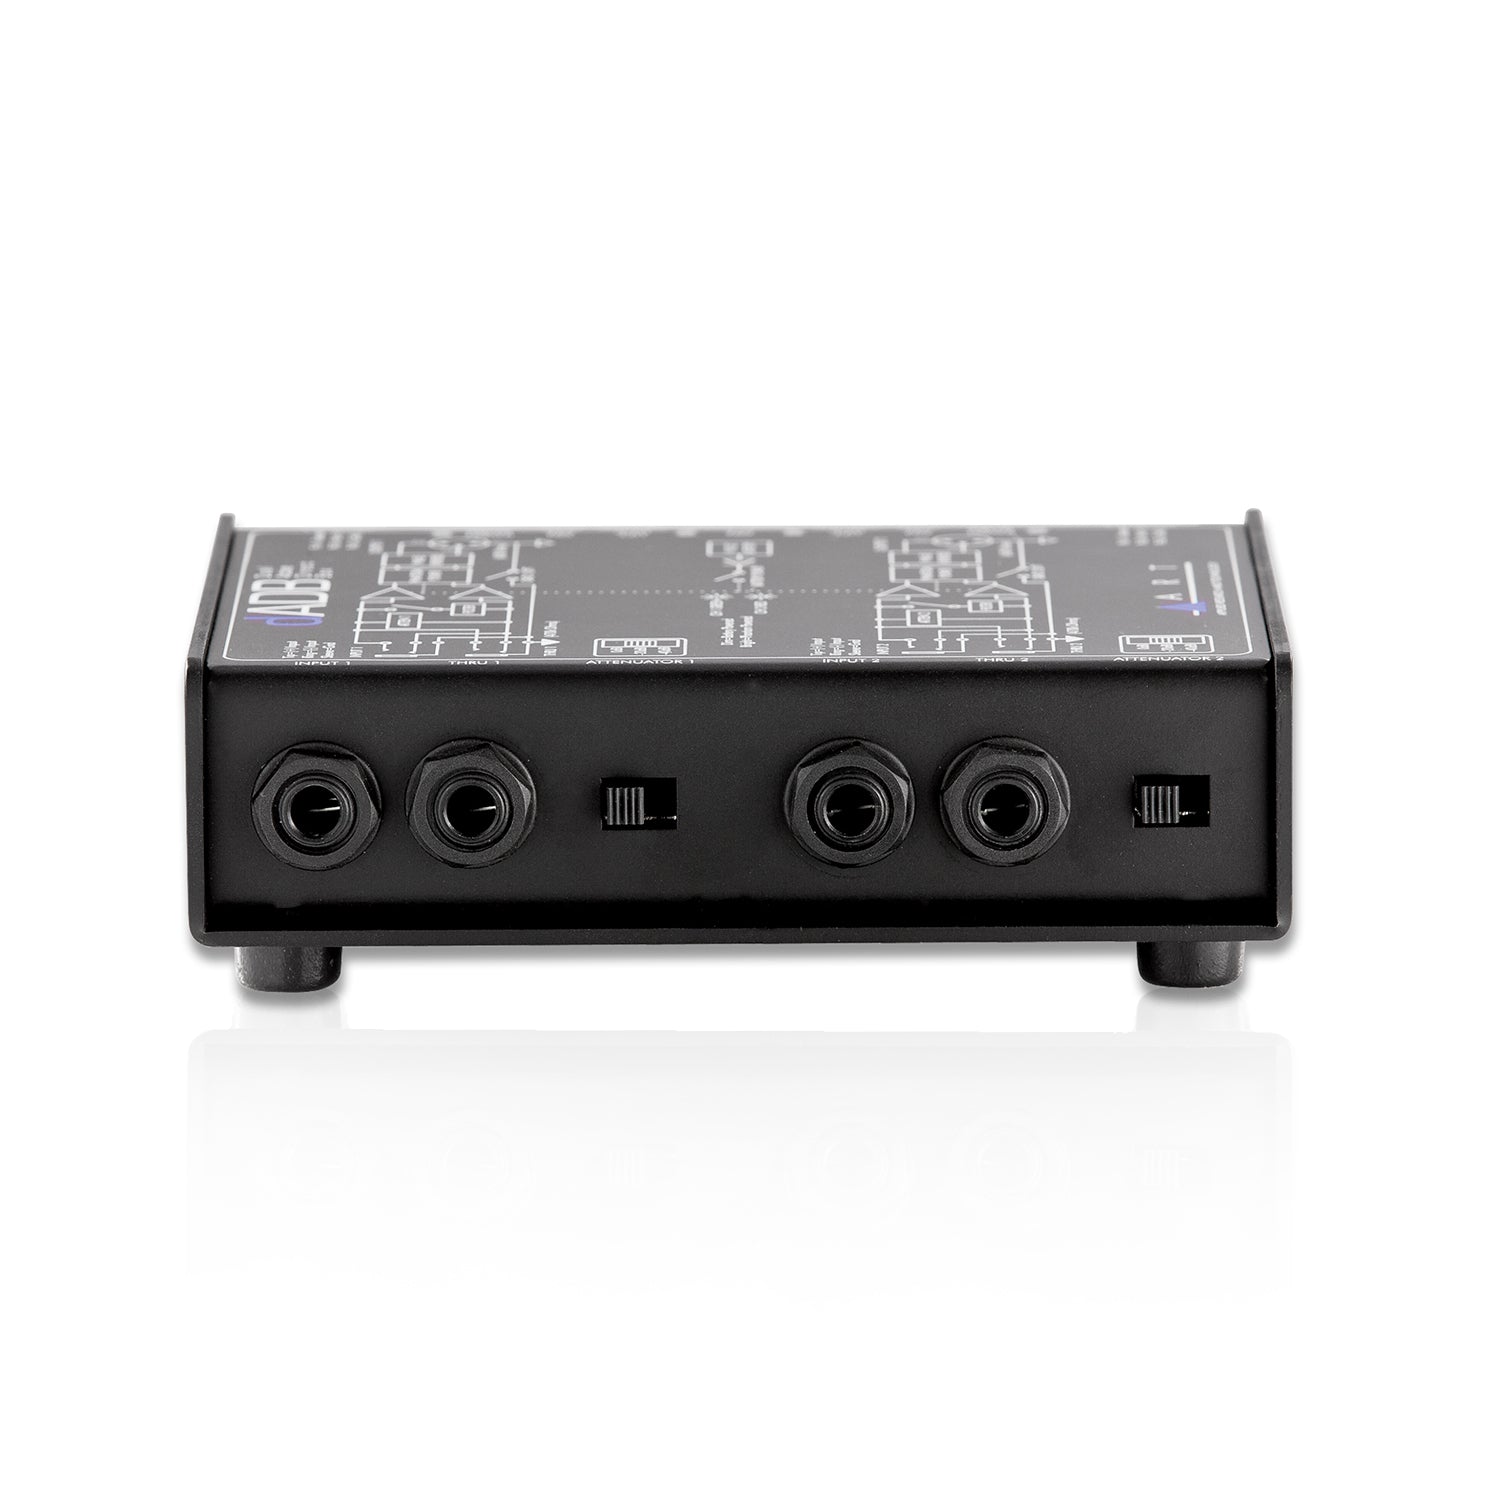 ART dADB 2-channel Active A/V Direct Box